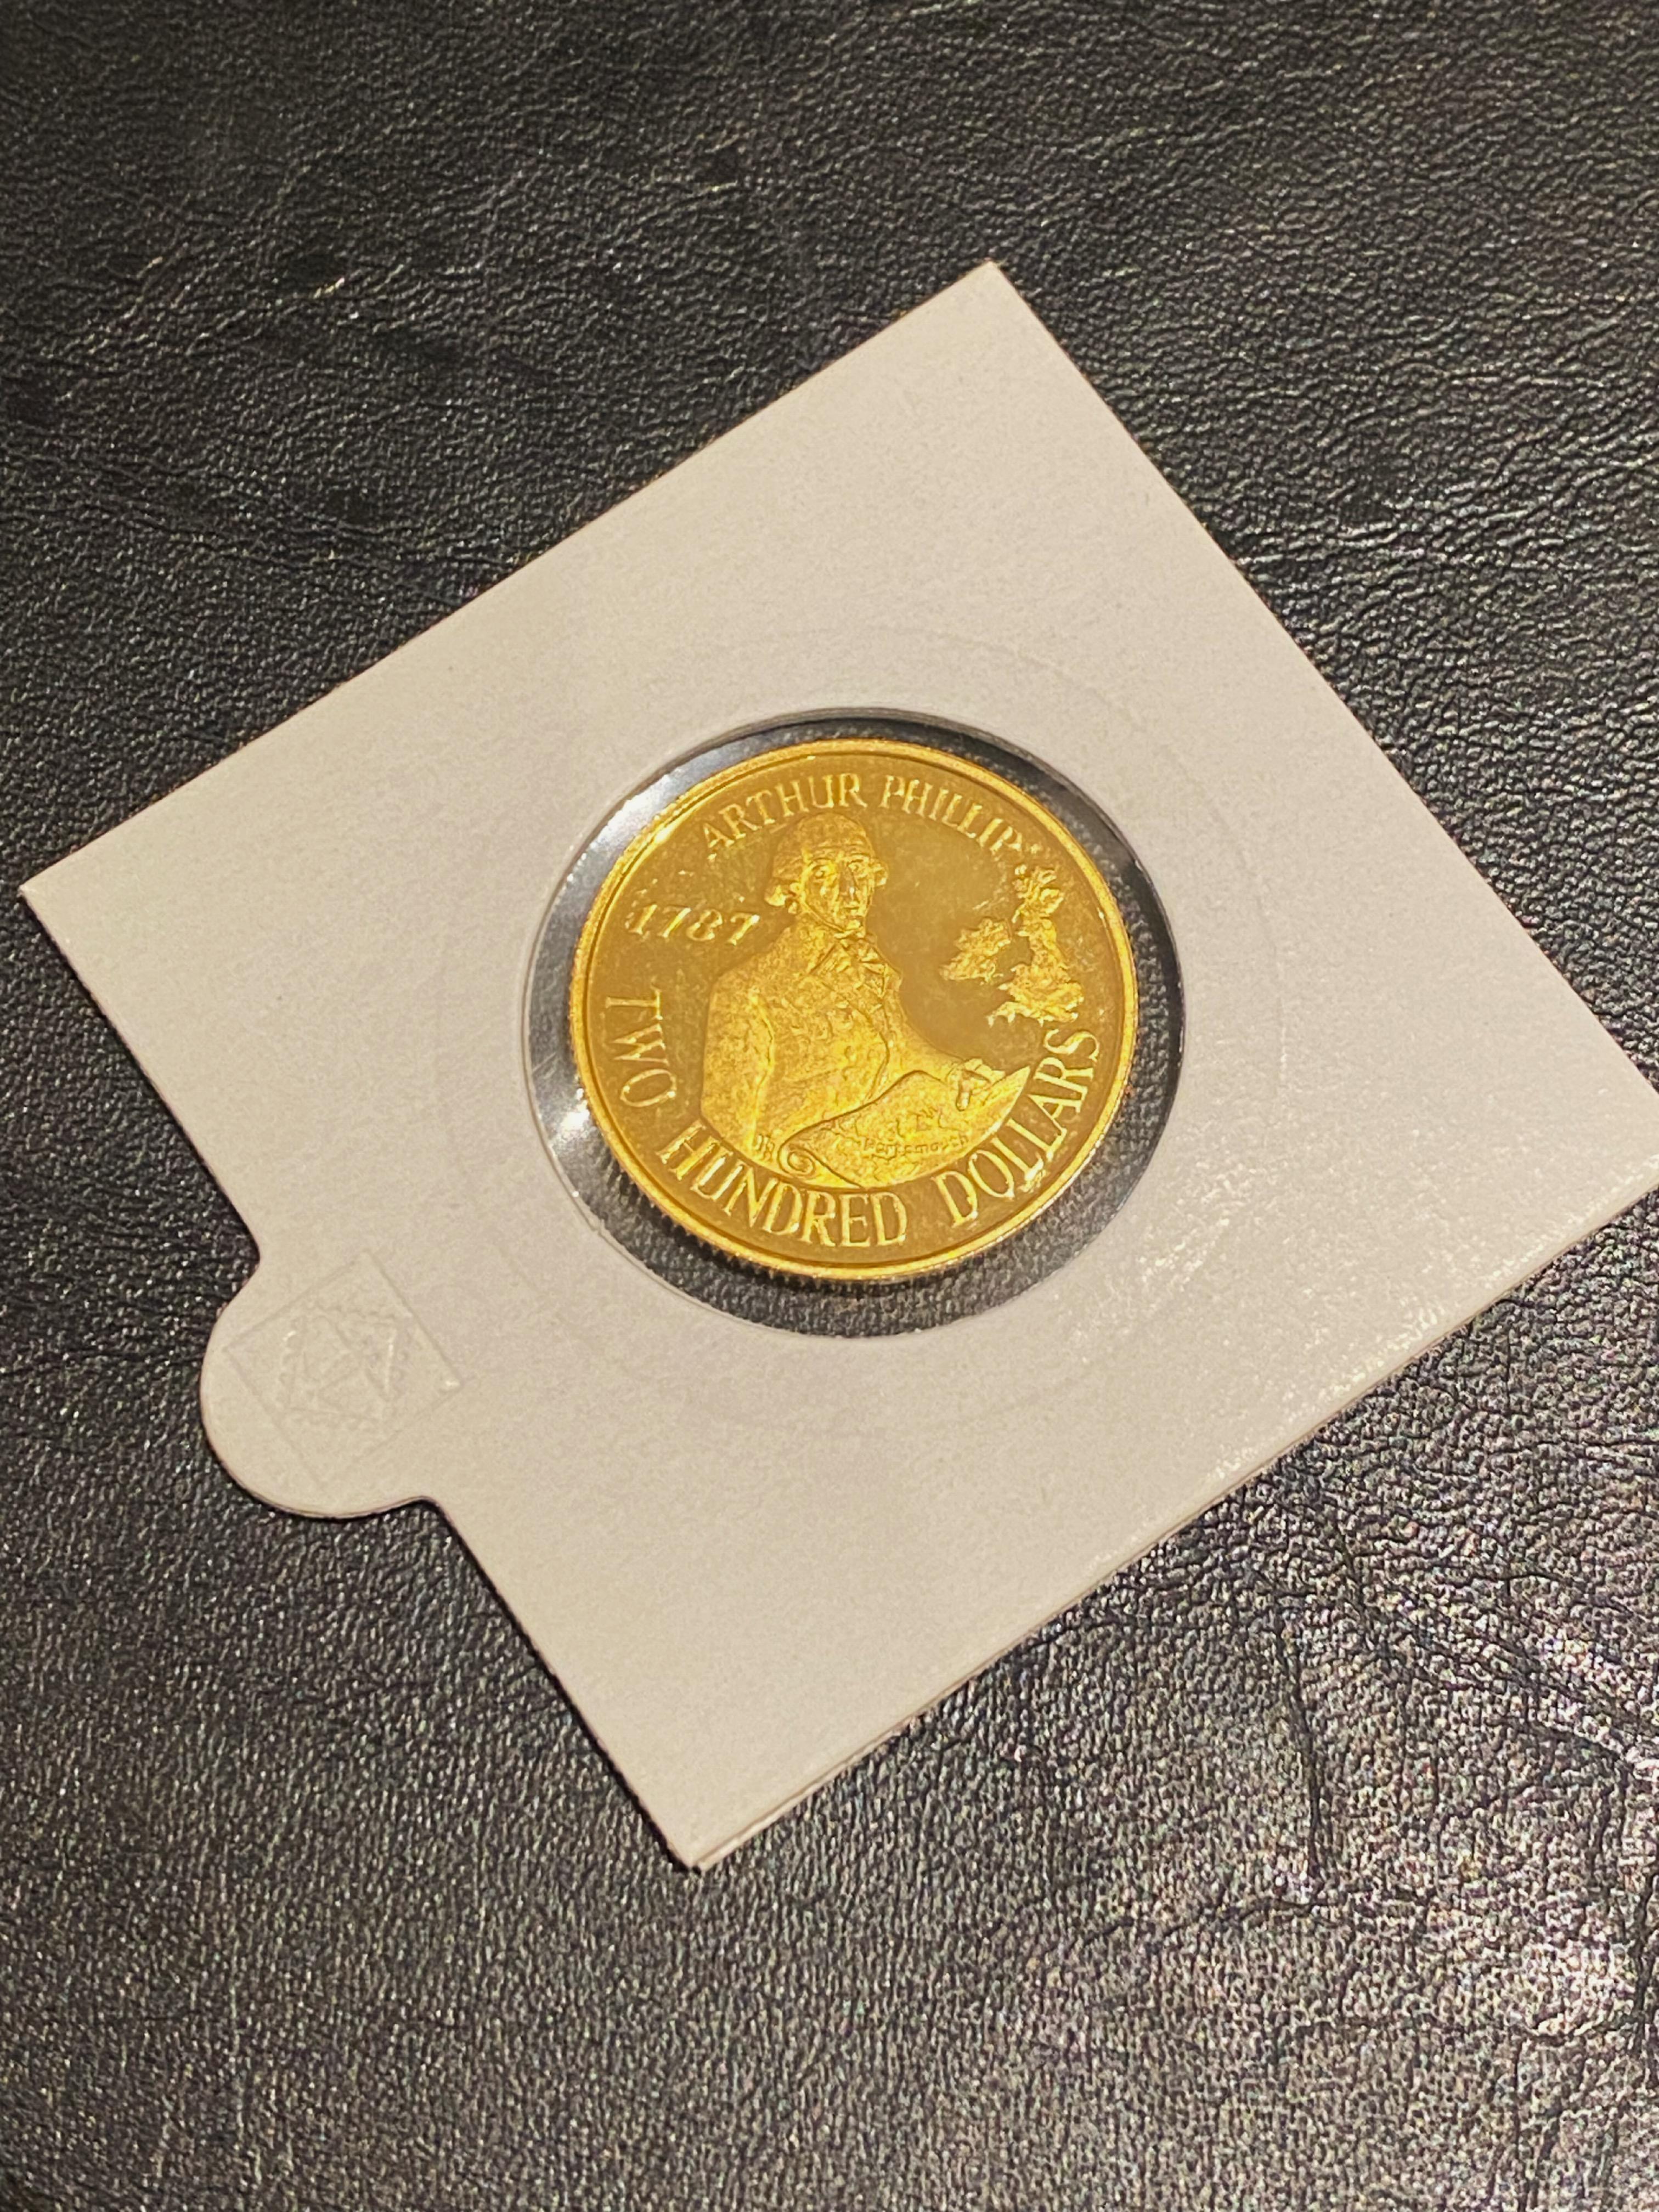 c1987 22K Gold Australian Embarkation Arthur Phillip $200 Uncirculated Coin

 

The obverse features the traditional portrait of Her Majesty Queen Elizabeth II 

The reverse depicts Captain Arthur Phillip stepping ashore at Sydeny Cove in 1787. 

